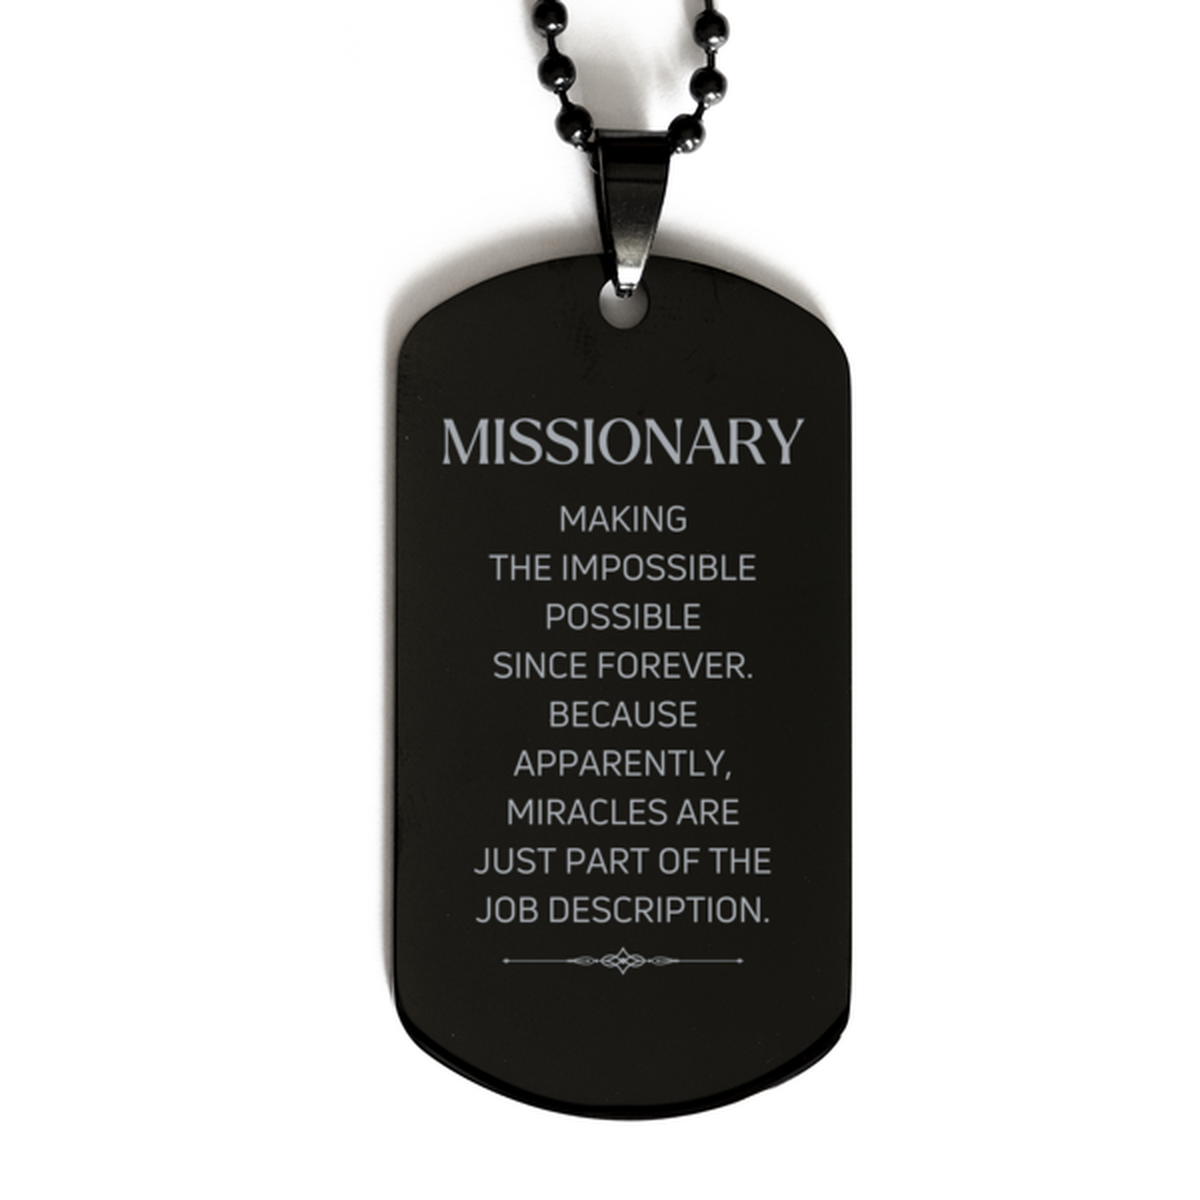 Funny Missionary Gifts, Miracles are just part of the job description, Inspirational Birthday Black Dog Tag For Missionary, Men, Women, Coworkers, Friends, Boss